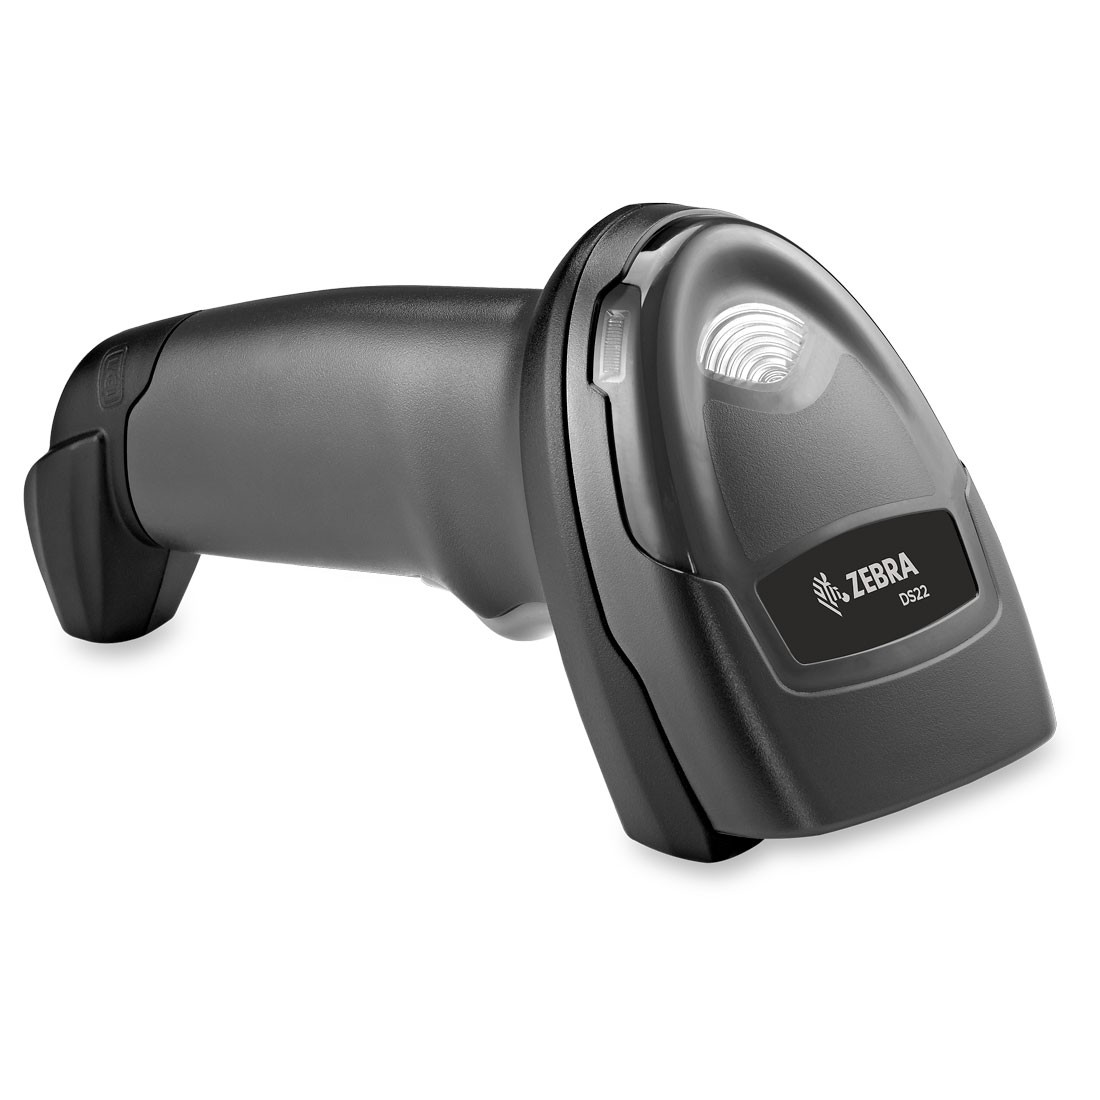 Buy Zebra Ds2208 Barcode Scanner Online ₹8499 From Shopclues 7445